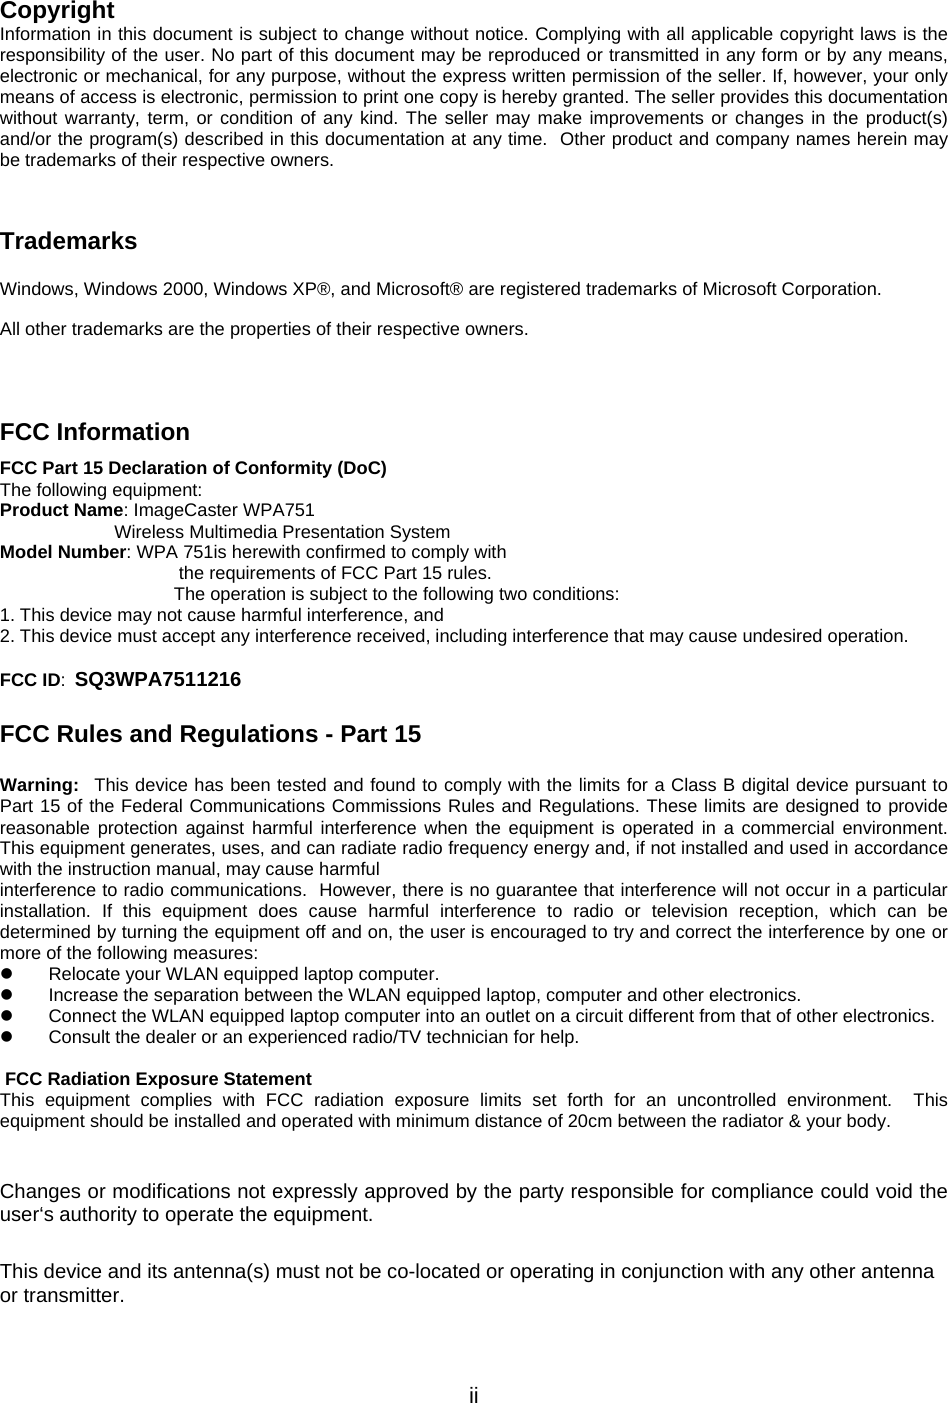              iiCopyright Information in this document is subject to change without notice. Complying with all applicable copyright laws is the responsibility of the user. No part of this document may be reproduced or transmitted in any form or by any means, electronic or mechanical, for any purpose, without the express written permission of the seller. If, however, your only means of access is electronic, permission to print one copy is hereby granted. The seller provides this documentation without warranty, term, or condition of any kind. The seller may make improvements or changes in the product(s) and/or the program(s) described in this documentation at any time.  Other product and company names herein may be trademarks of their respective owners.  Trademarks Windows, Windows 2000, Windows XP®, and Microsoft® are registered trademarks of Microsoft Corporation. All other trademarks are the properties of their respective owners.  FCC Information  FCC Part 15 Declaration of Conformity (DoC) The following equipment: Product Name: ImageCaster WPA751  Wireless Multimedia Presentation System Model Number: WPA 751is herewith confirmed to comply with  the requirements of FCC Part 15 rules.  The operation is subject to the following two conditions: 1. This device may not cause harmful interference, and 2. This device must accept any interference received, including interference that may cause undesired operation.  FCC ID: SQ3WPA7511216  FCC Rules and Regulations - Part 15  Warning:  This device has been tested and found to comply with the limits for a Class B digital device pursuant to Part 15 of the Federal Communications Commissions Rules and Regulations. These limits are designed to provide reasonable protection against harmful interference when the equipment is operated in a commercial environment. This equipment generates, uses, and can radiate radio frequency energy and, if not installed and used in accordance with the instruction manual, may cause harmful interference to radio communications.  However, there is no guarantee that interference will not occur in a particular installation. If this equipment does cause harmful interference to radio or television reception, which can be determined by turning the equipment off and on, the user is encouraged to try and correct the interference by one or more of the following measures:   Relocate your WLAN equipped laptop computer.   Increase the separation between the WLAN equipped laptop, computer and other electronics.   Connect the WLAN equipped laptop computer into an outlet on a circuit different from that of other electronics.   Consult the dealer or an experienced radio/TV technician for help.   FCC Radiation Exposure Statement This equipment complies with FCC radiation exposure limits set forth for an uncontrolled environment.  This equipment should be installed and operated with minimum distance of 20cm between the radiator &amp; your body.  Changes or modifications not expressly approved by the party responsible for compliance could void the user‘s authority to operate the equipment. This device and its antenna(s) must not be co-located or operating in conjunction with any other antenna or transmitter. 